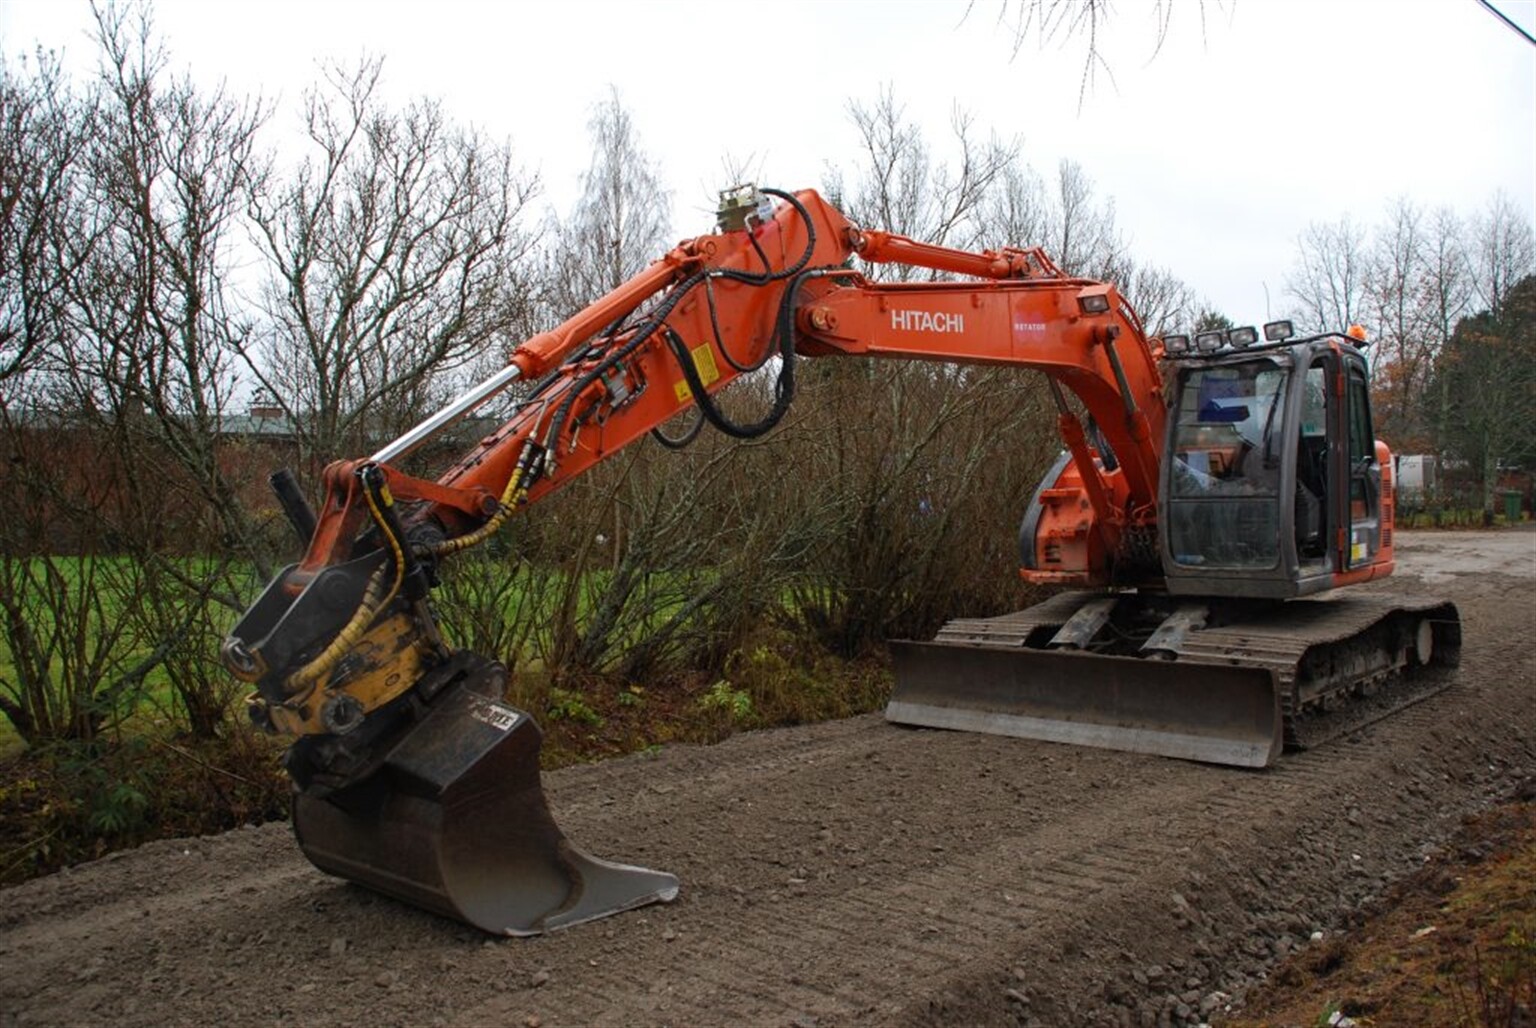 Turn your digger bucket into a compactor plate with Dynaset HVB